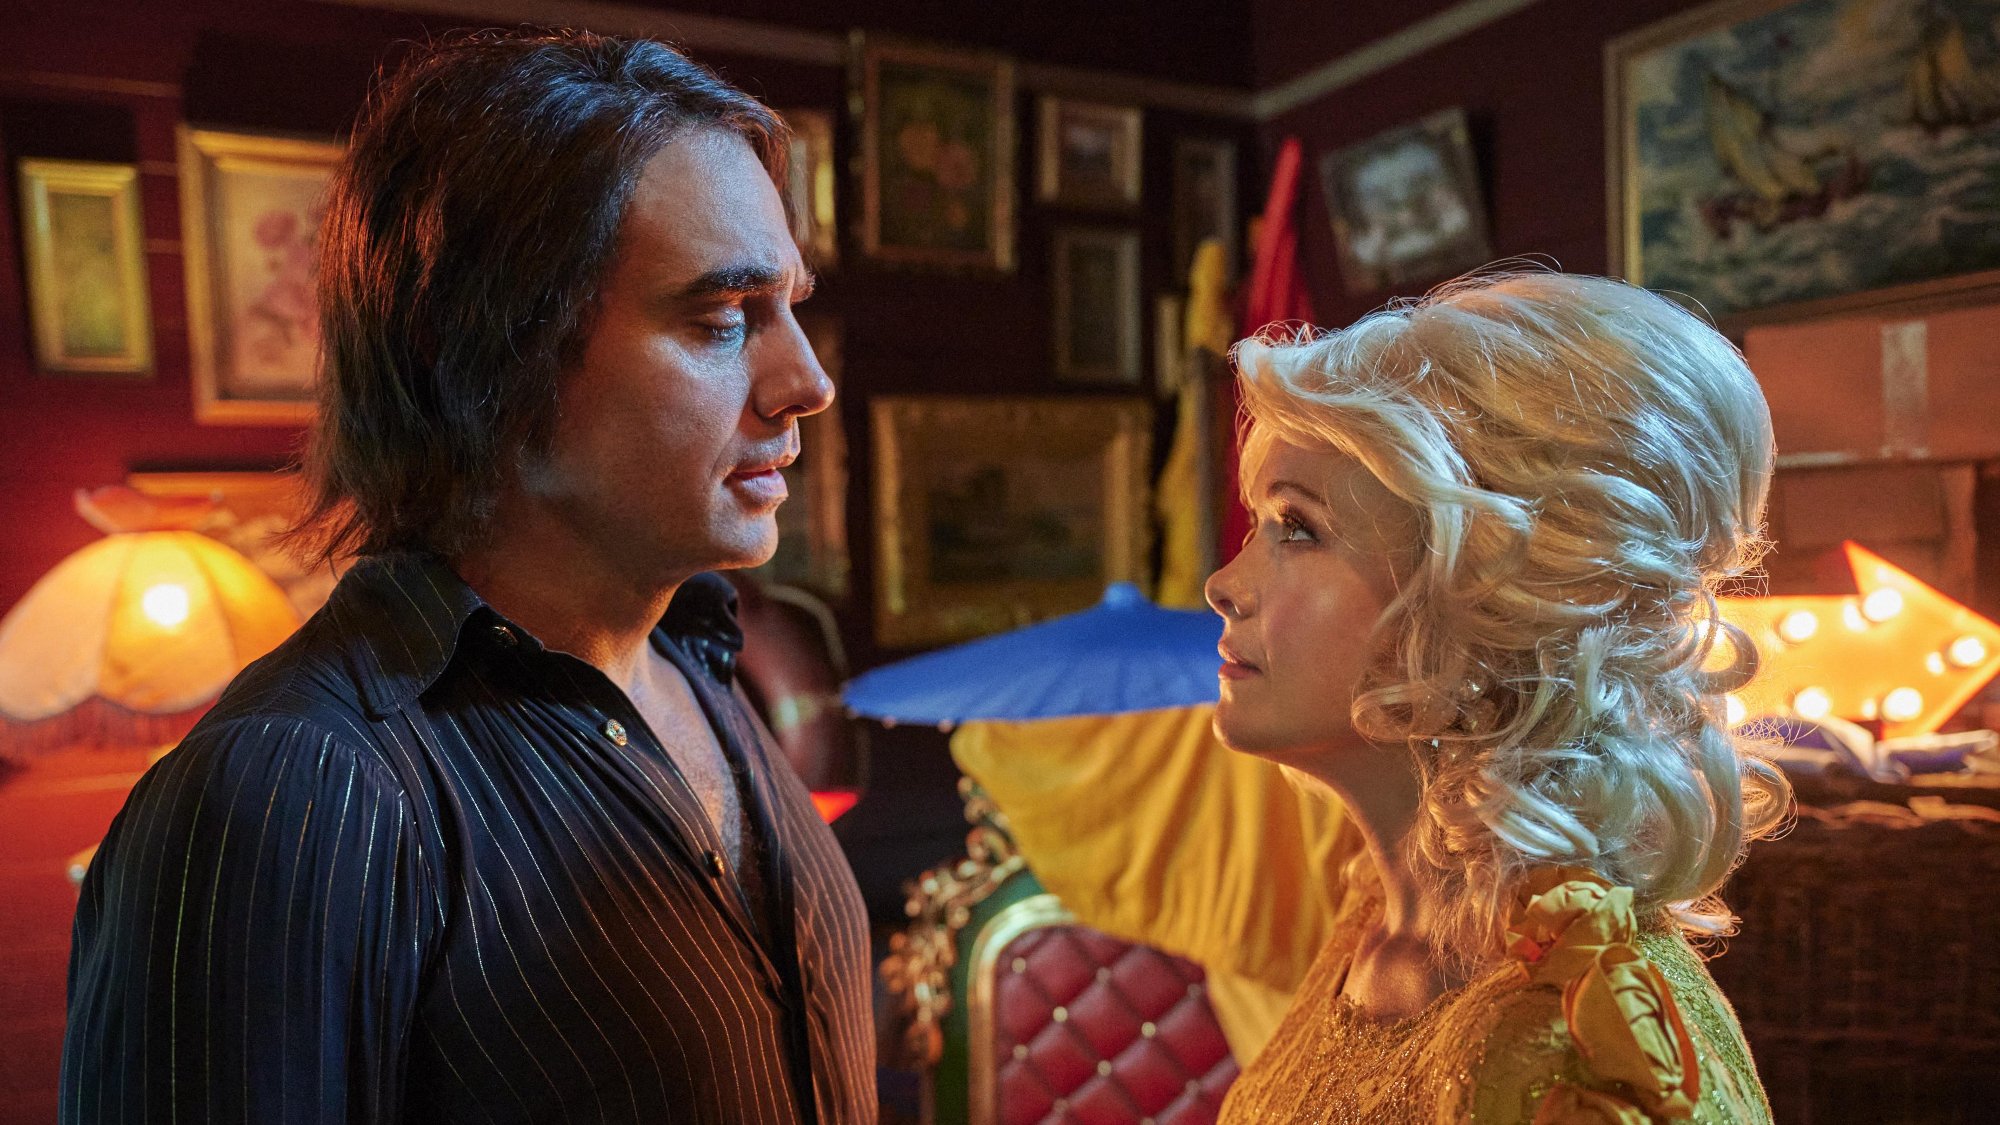 ‘Seriously Red’ Movie Review [SXSW 2022]: Dolly Parton Comedy Gets Lost in Its Dolly-Isms